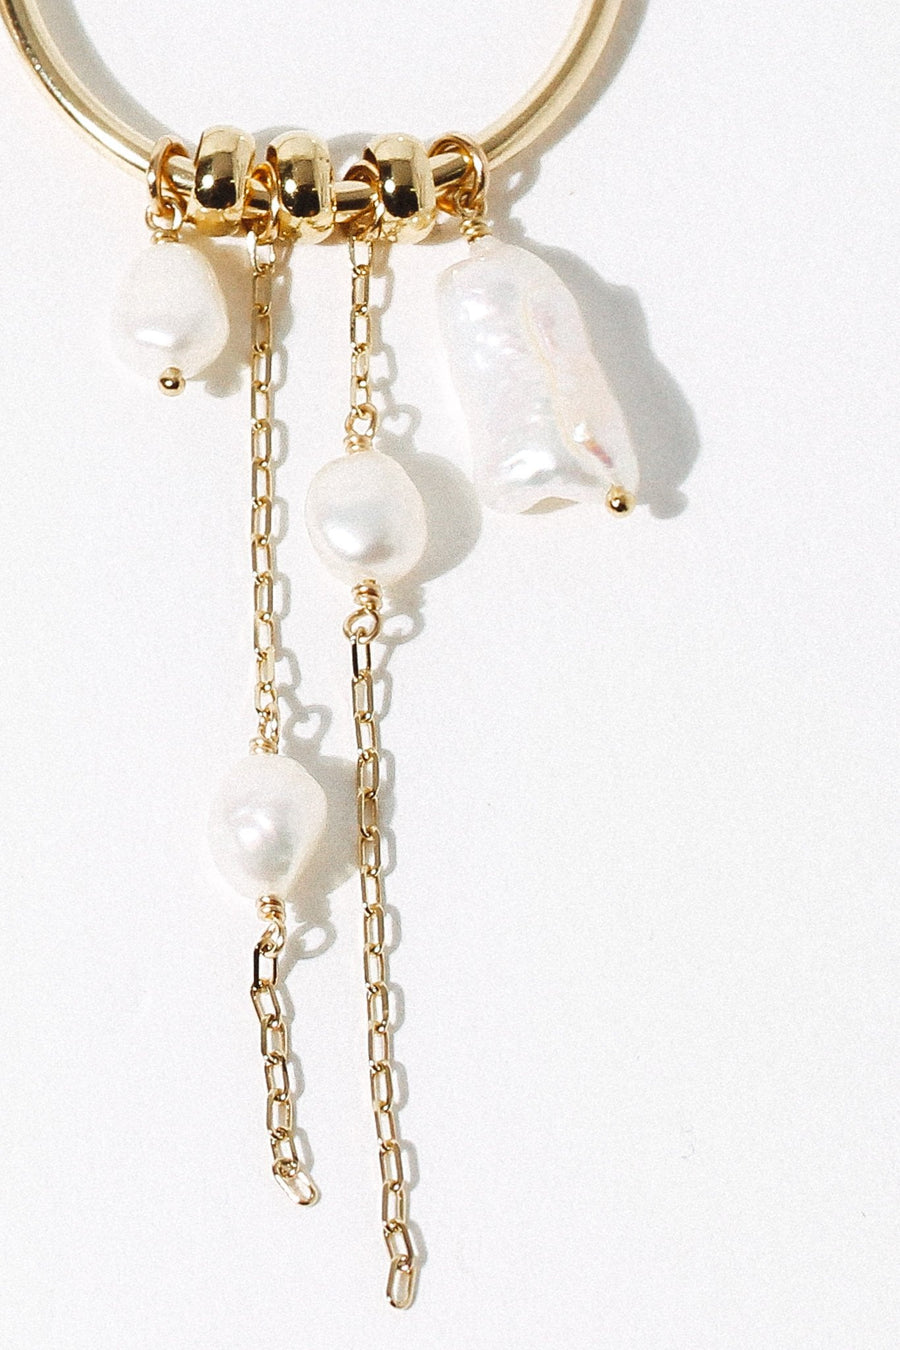 CGM Jewelry Gold Nymph Pearl Earrings